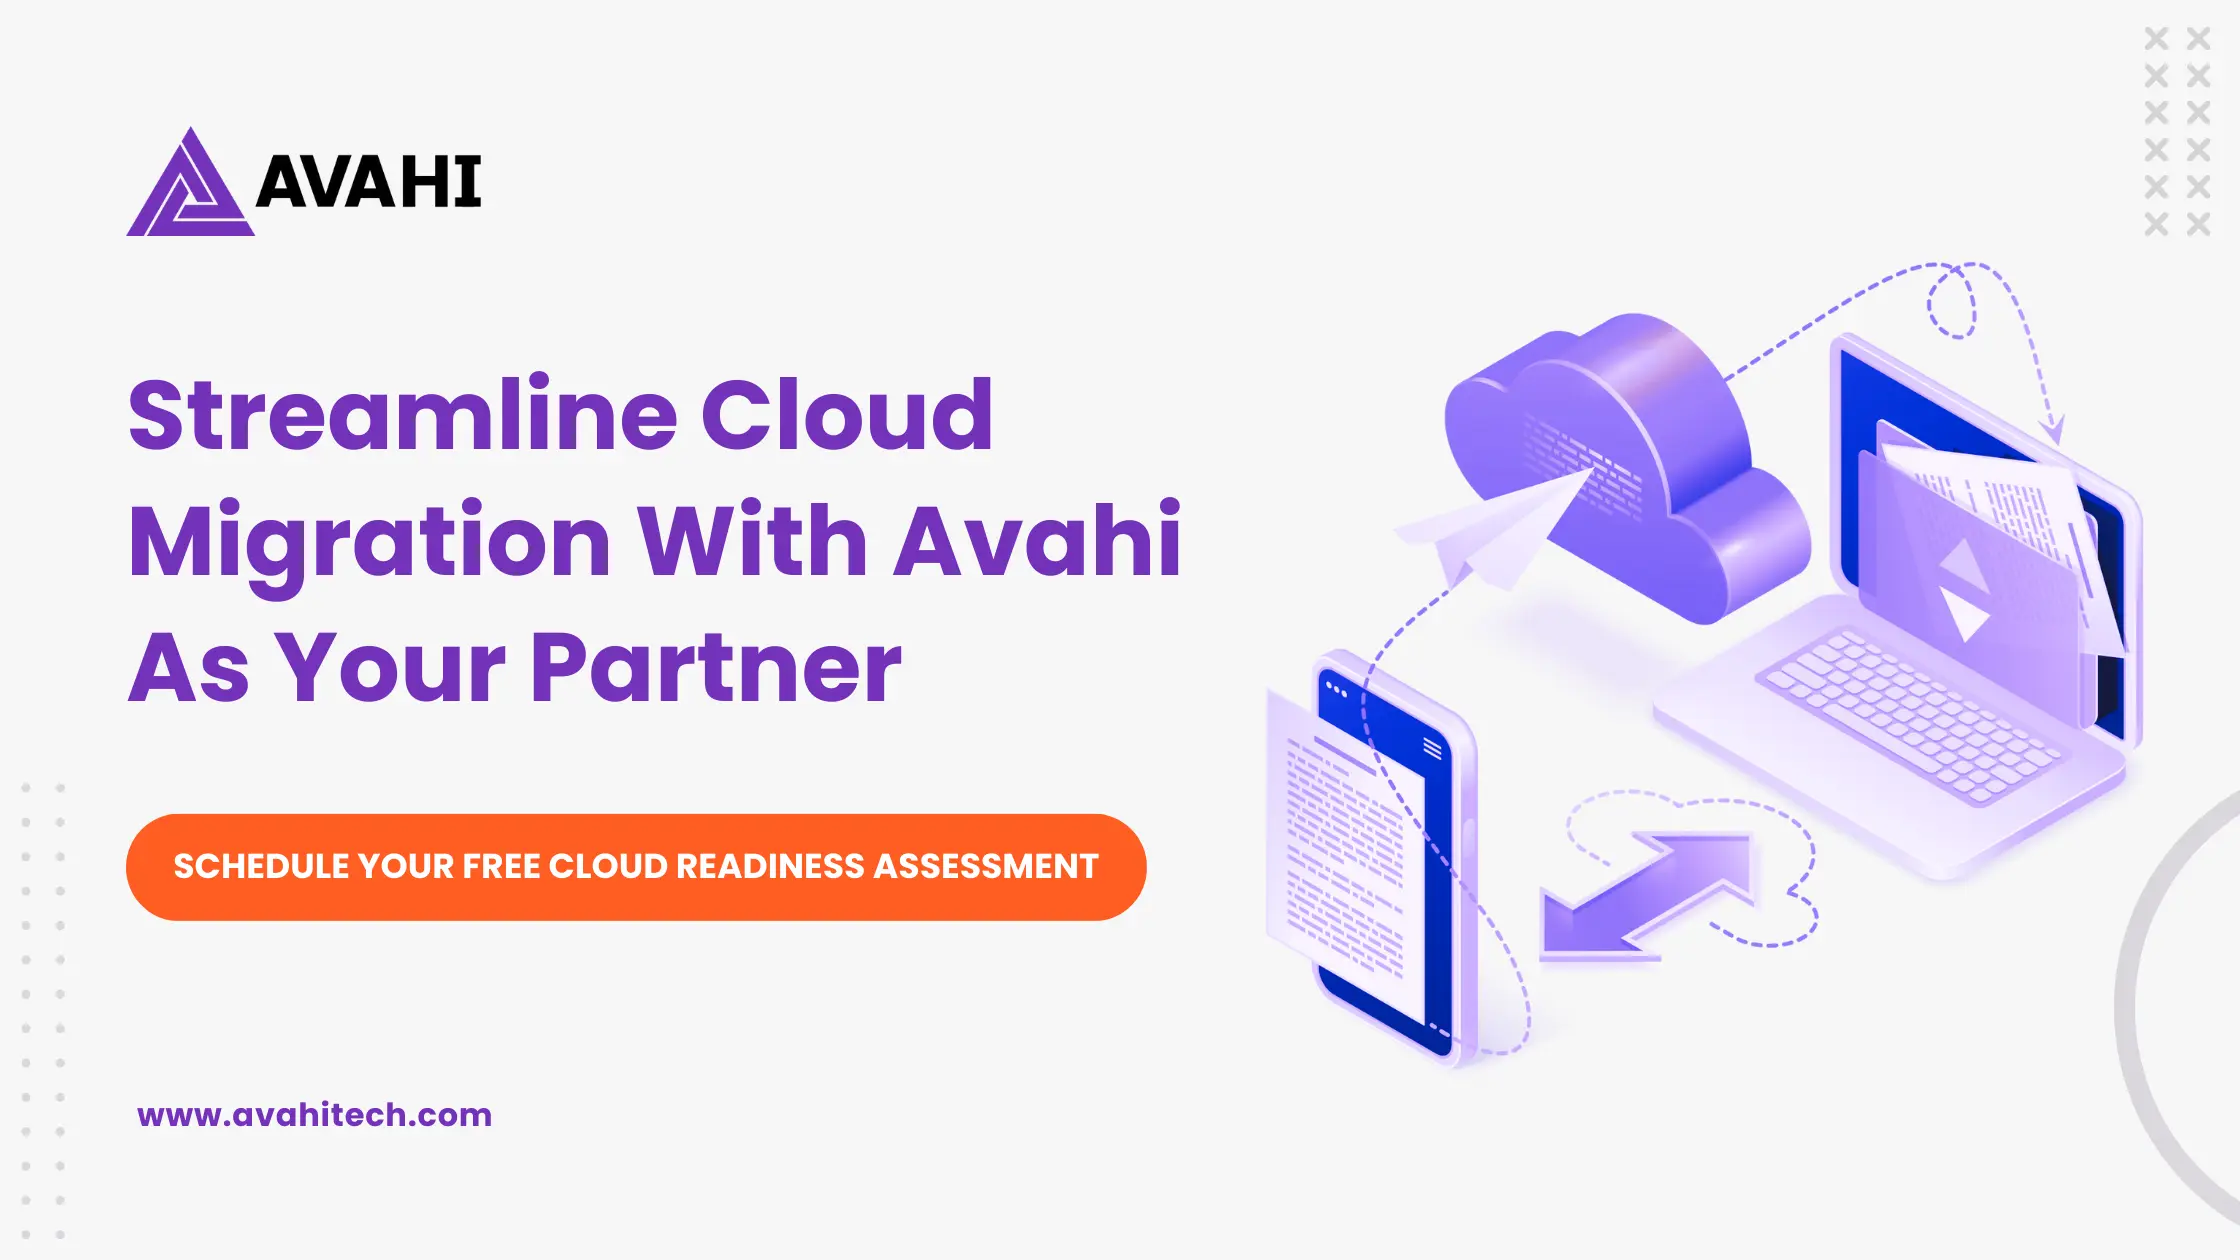 Streamline Cloud Migration With Avahi As Your Partner